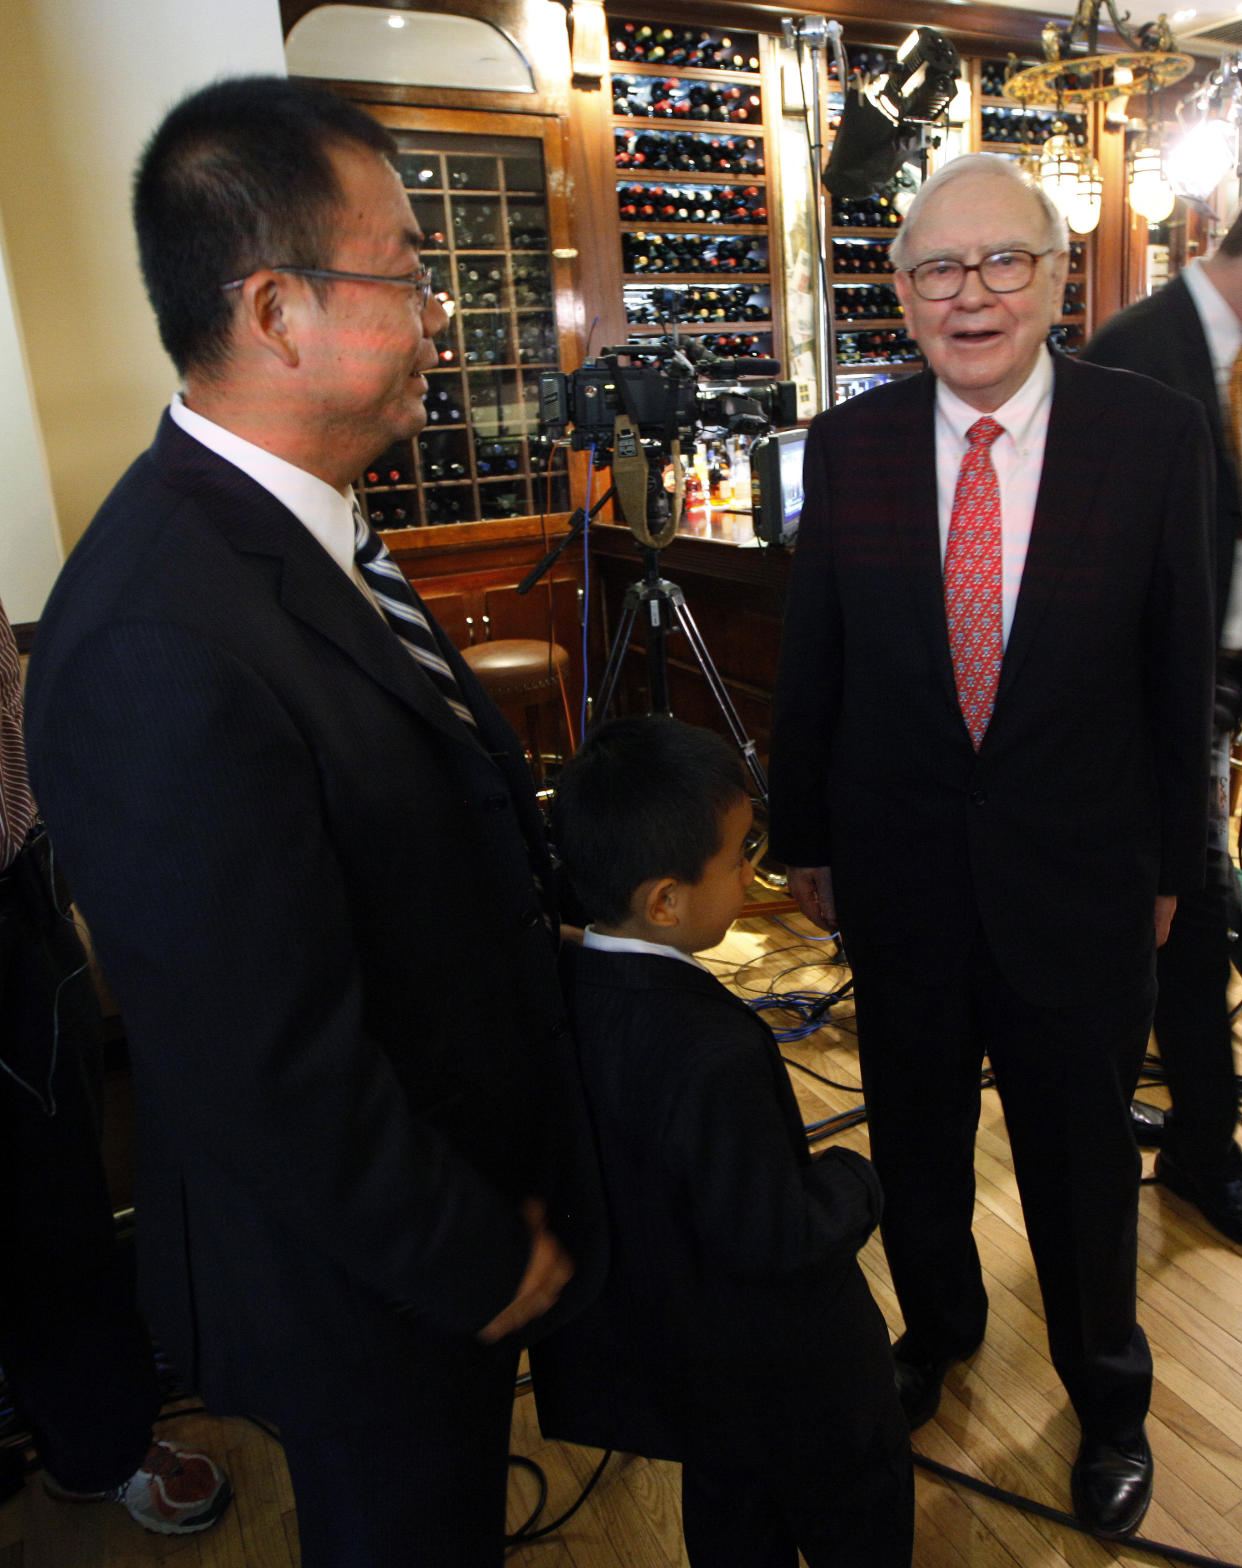 Hedge fund manager Zhao Danyang (L) and his son Zhao Ziyang (age 5 1/2) stand with billionaire investor Warren Buffett after placing the winning bid in a charity auction for lunch with Buffett in New York, June 24, 2009. Buffett, the Omaha, Nebraska-based chief executive officer of Berkshire Hathaway, handed his wallet to the younger Zhao and then whispered him a stock tip as they passed by photographers after completing television interviews at New York's famous steak house, Smith&Wollensky.     REUTERS/Chip East   (UNITED STATES BUSINESS SOCIETY)